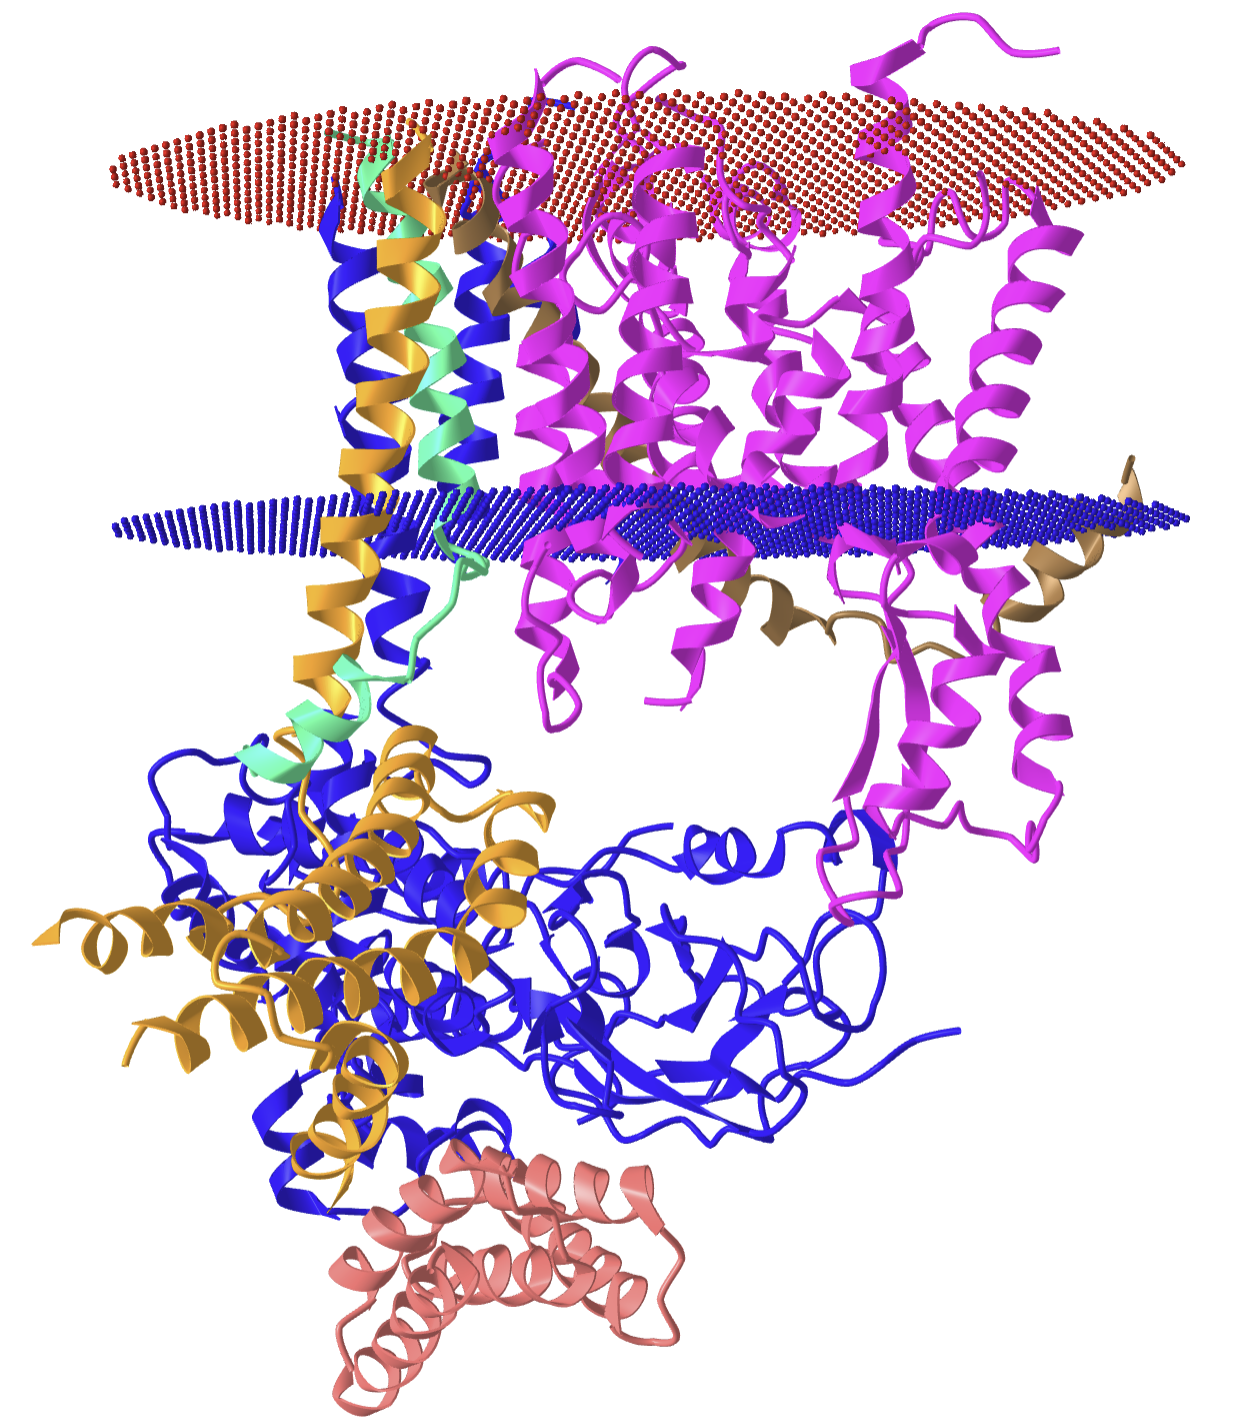 Sec Complex from yeast (6ND1).png